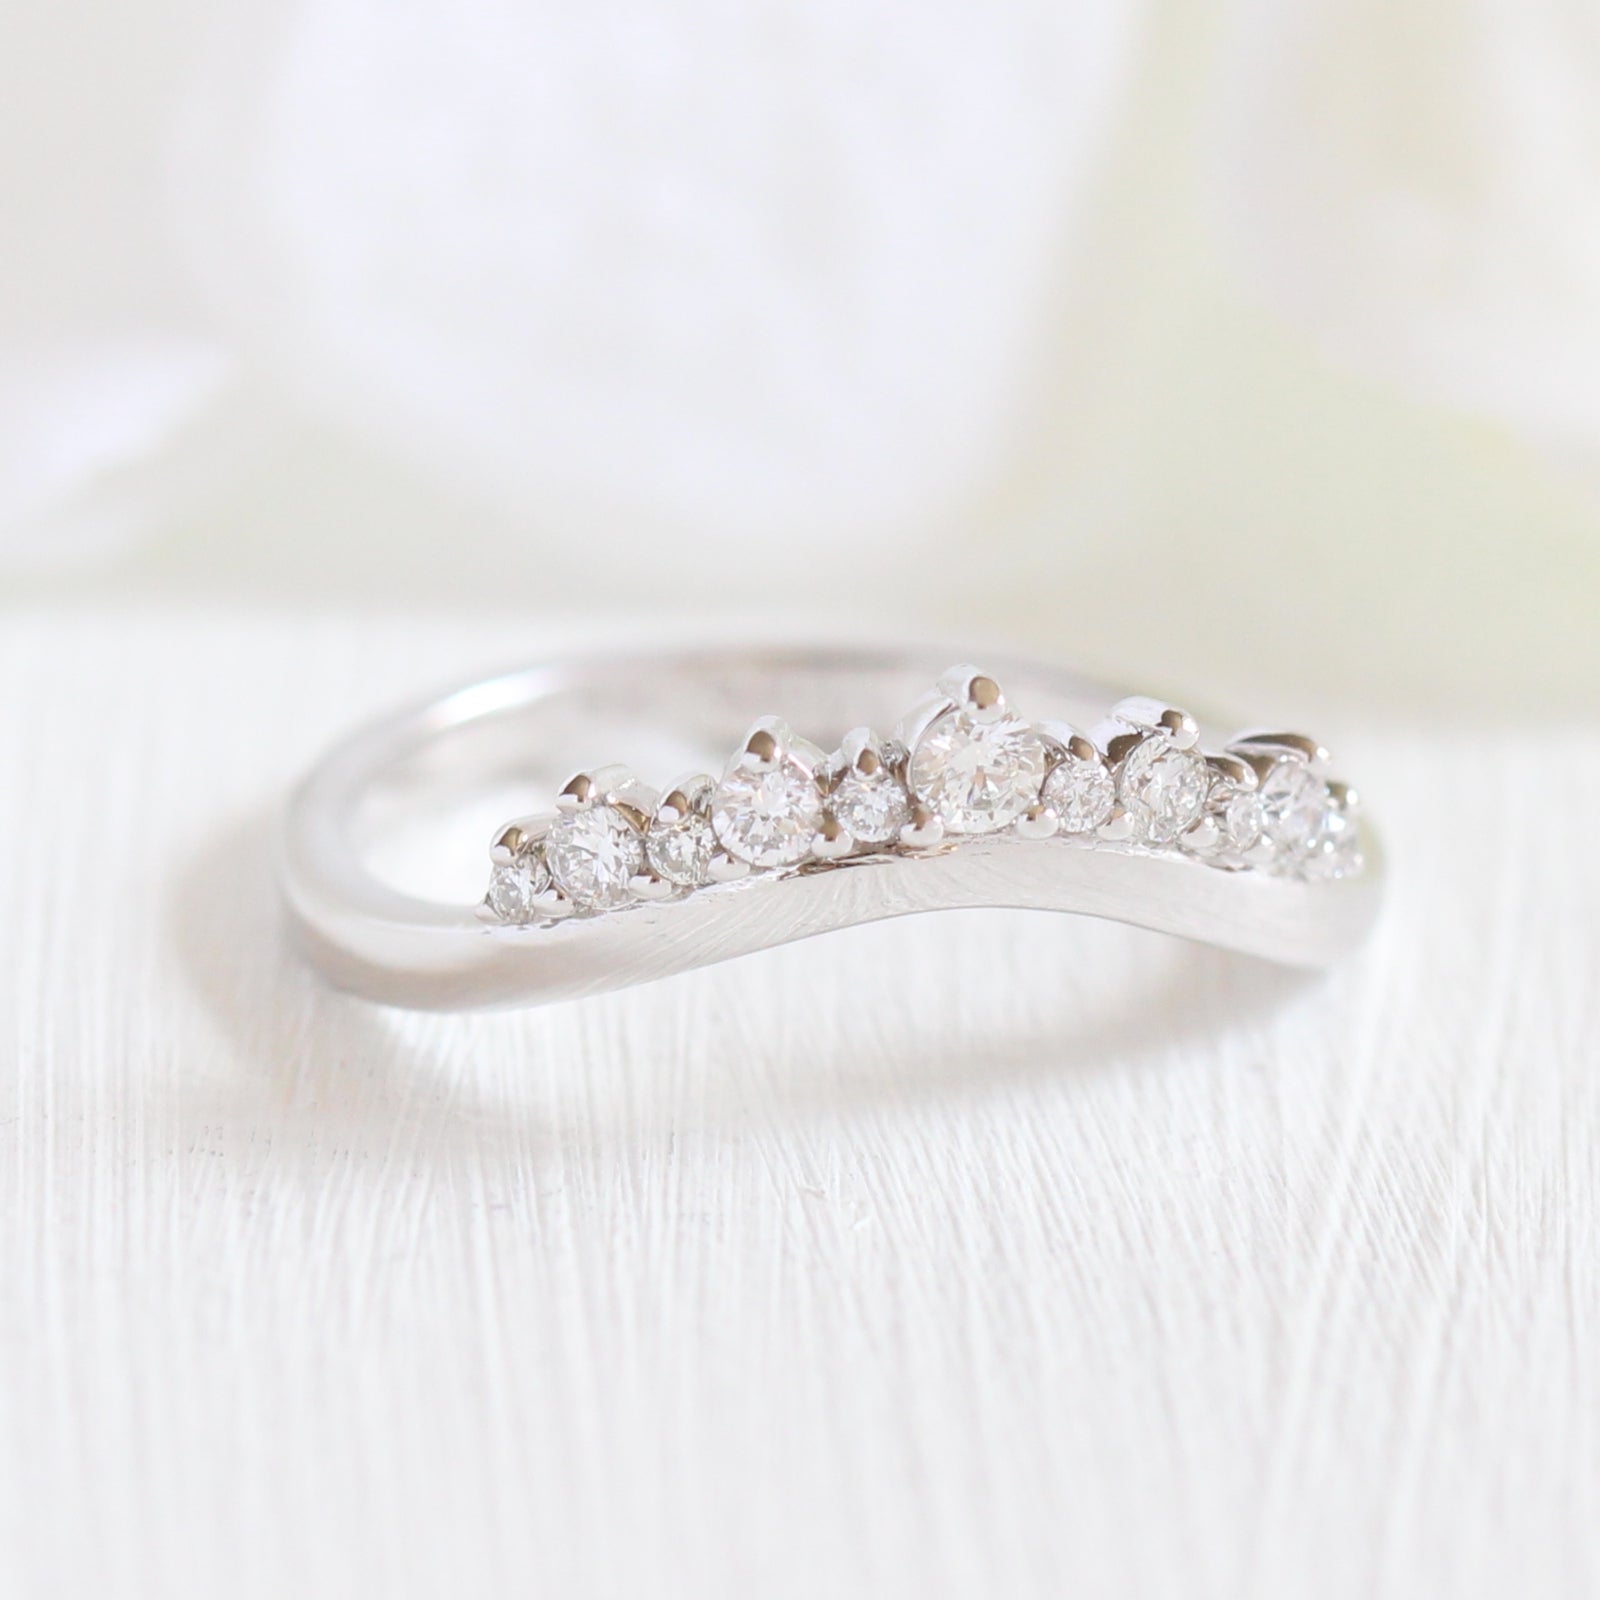 Crown Diamond Ring in White Gold Curved Band by La More Design